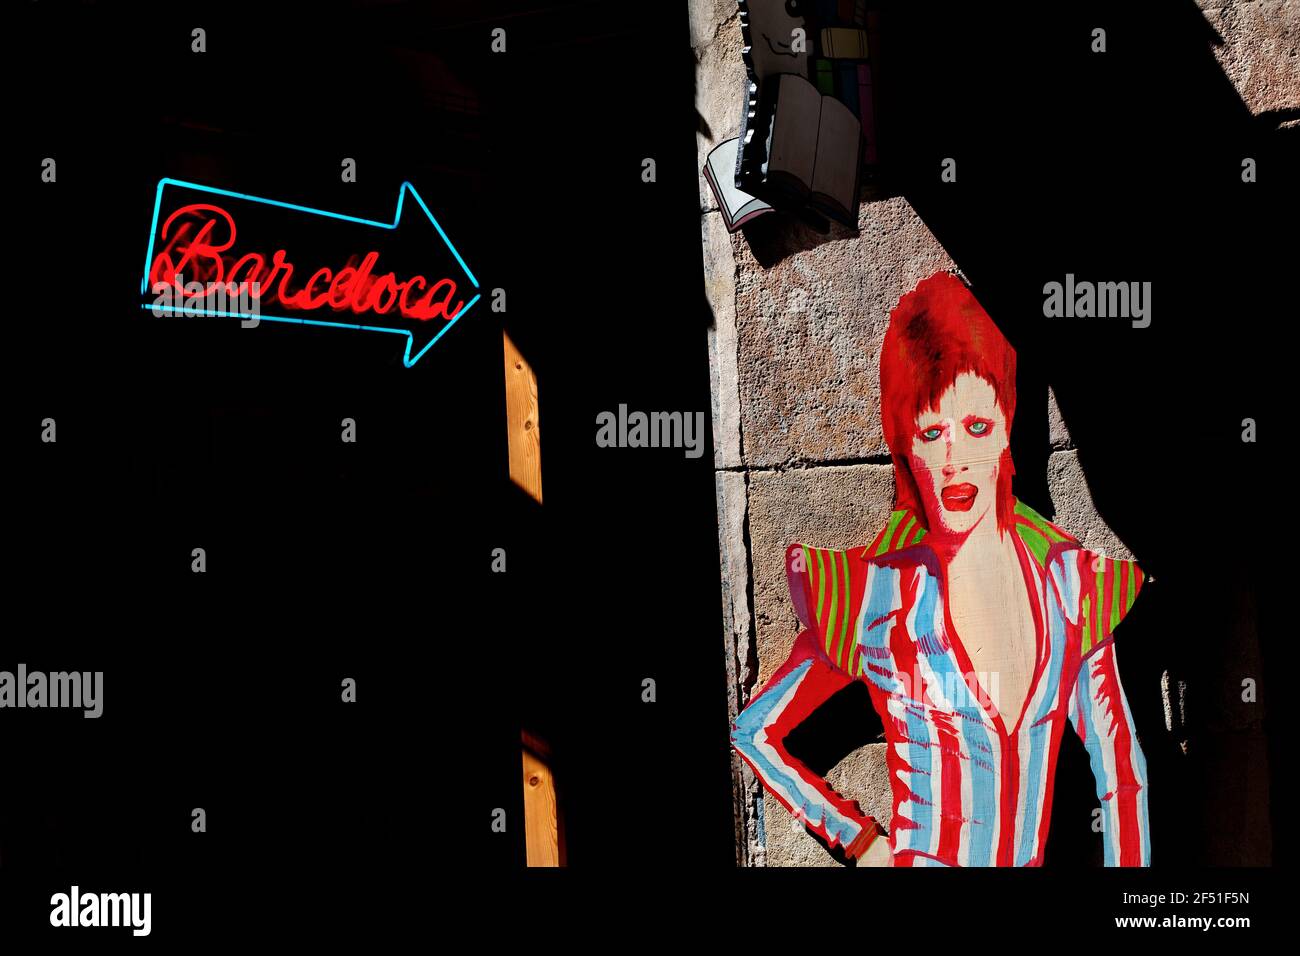 David Bowie cut-out, Barcelona, Spain. Stock Photo